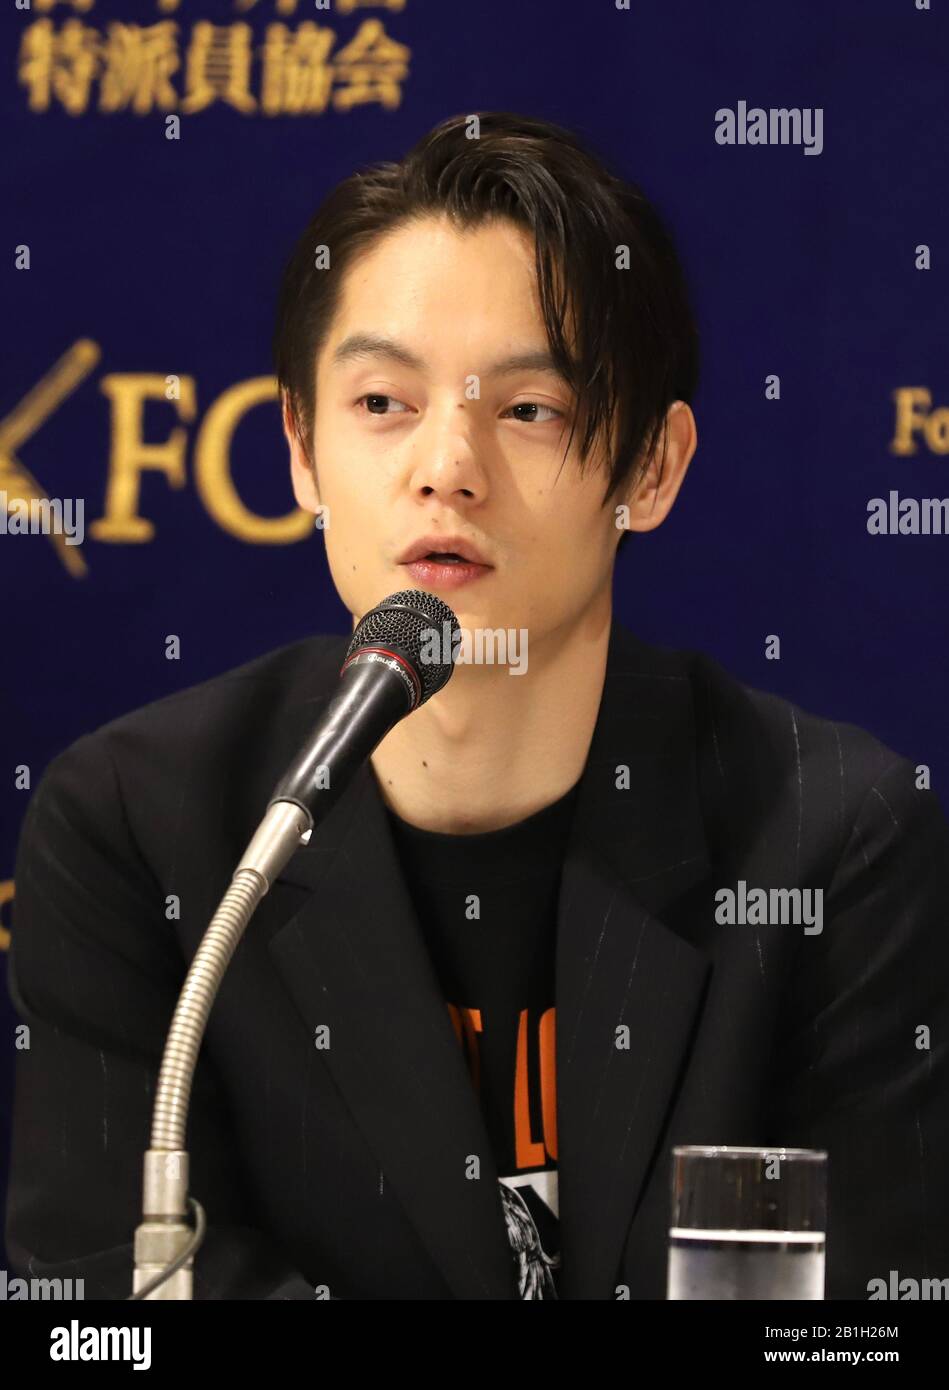 Tokyo, Japan. 25th Feb, 2020. Japanese actor Masataka Kubota speaks at the  press conference for his latest movie "First Love" at the Foreign  Correspondents' Club of Japan in Tokyo on Tuesday, February